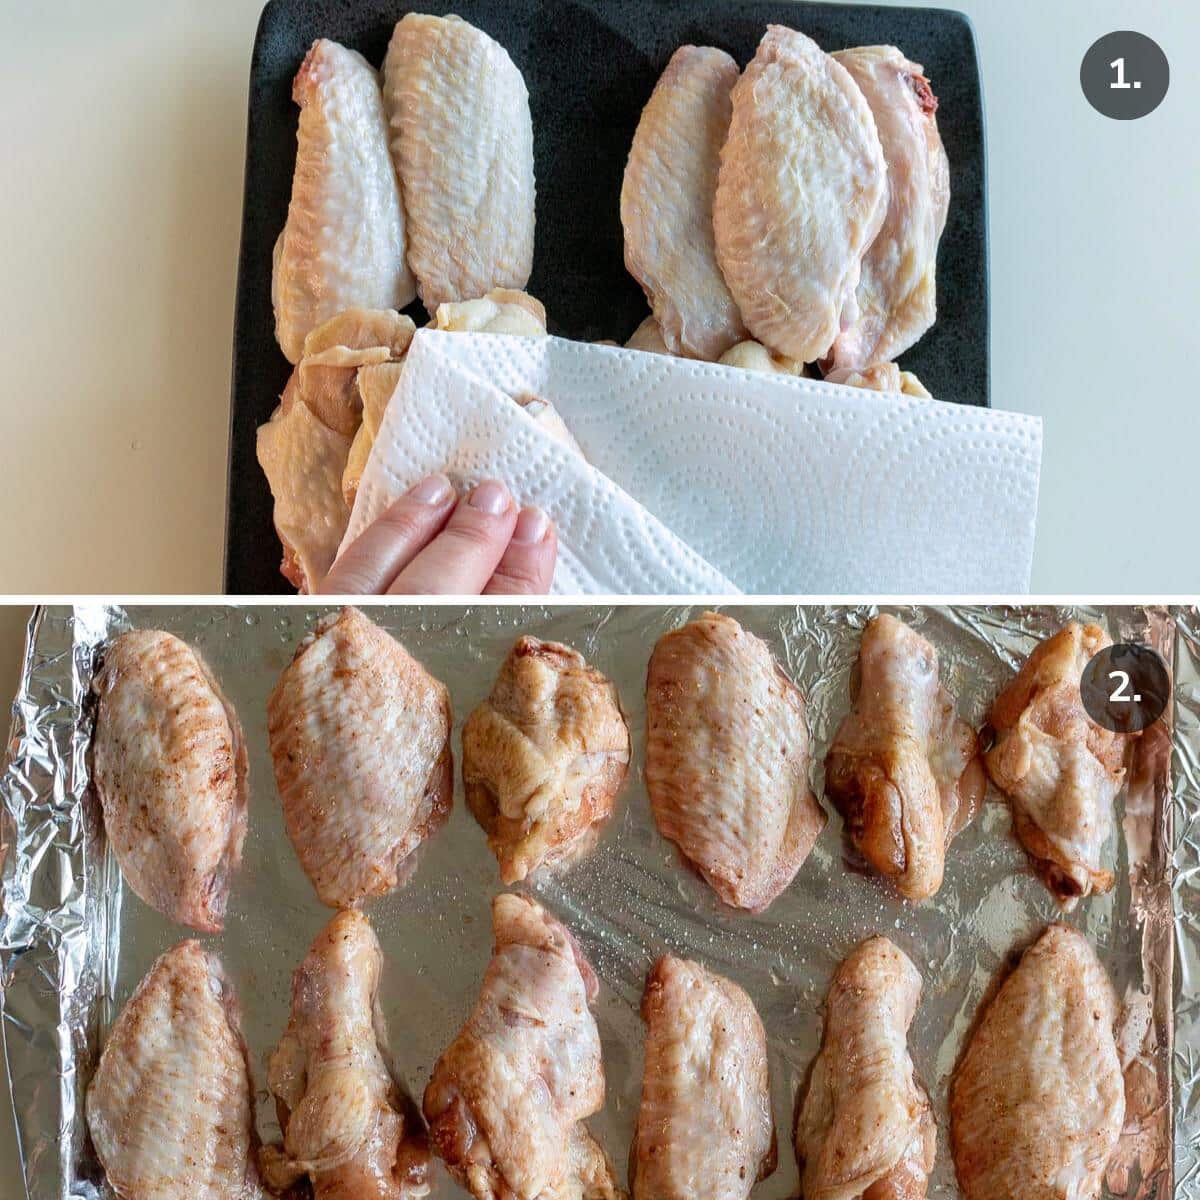 Patting the chicken drumsticks dry and ready for the oven. 